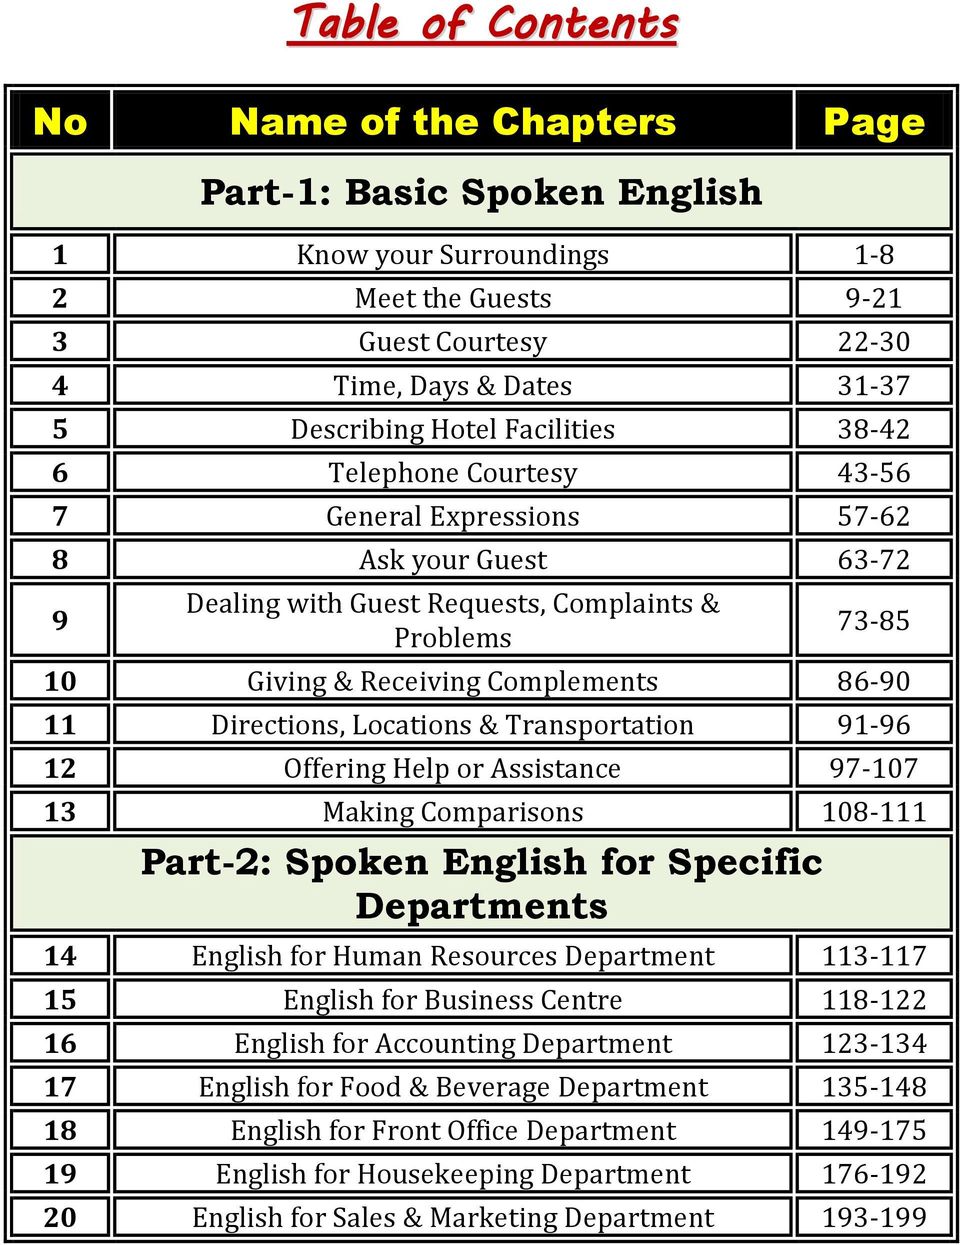 Directions, Locations & Transportation 91-96 12 Offering Help or Assistance 97-107 13 Making Comparisons 108-111 Part-2: Spoken English for Specific Departments 14 English for Human Resources